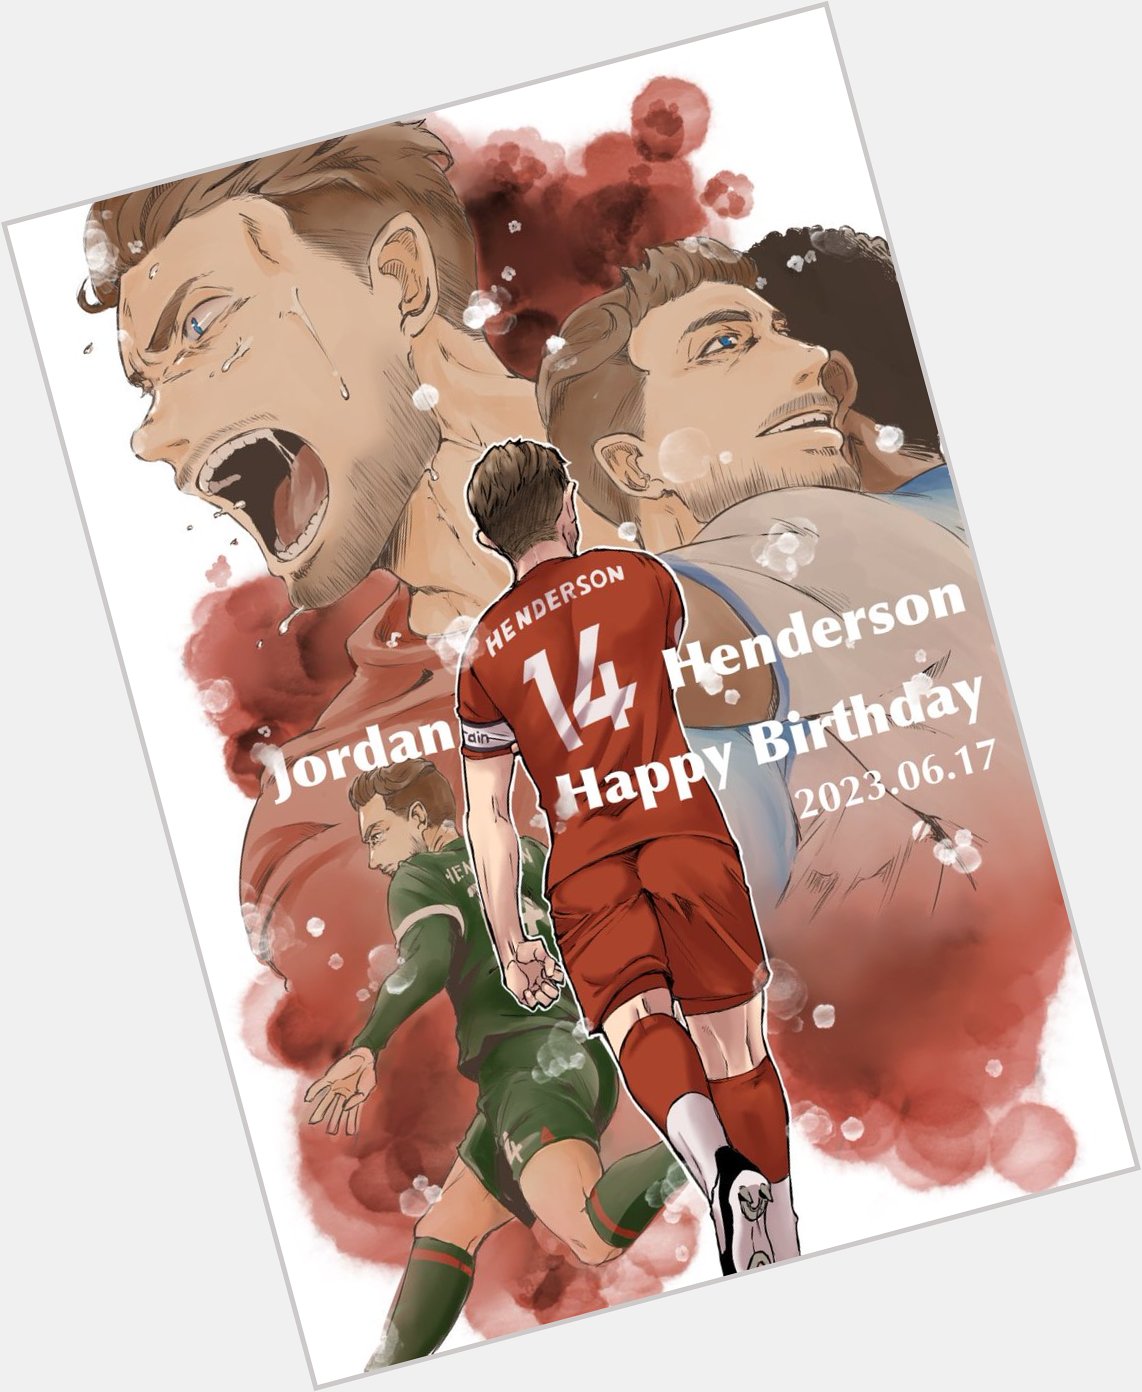 Happy 33rd Birthday to reds skipper,Jordan Henderson!!!     I sincerely wish for your happiness  